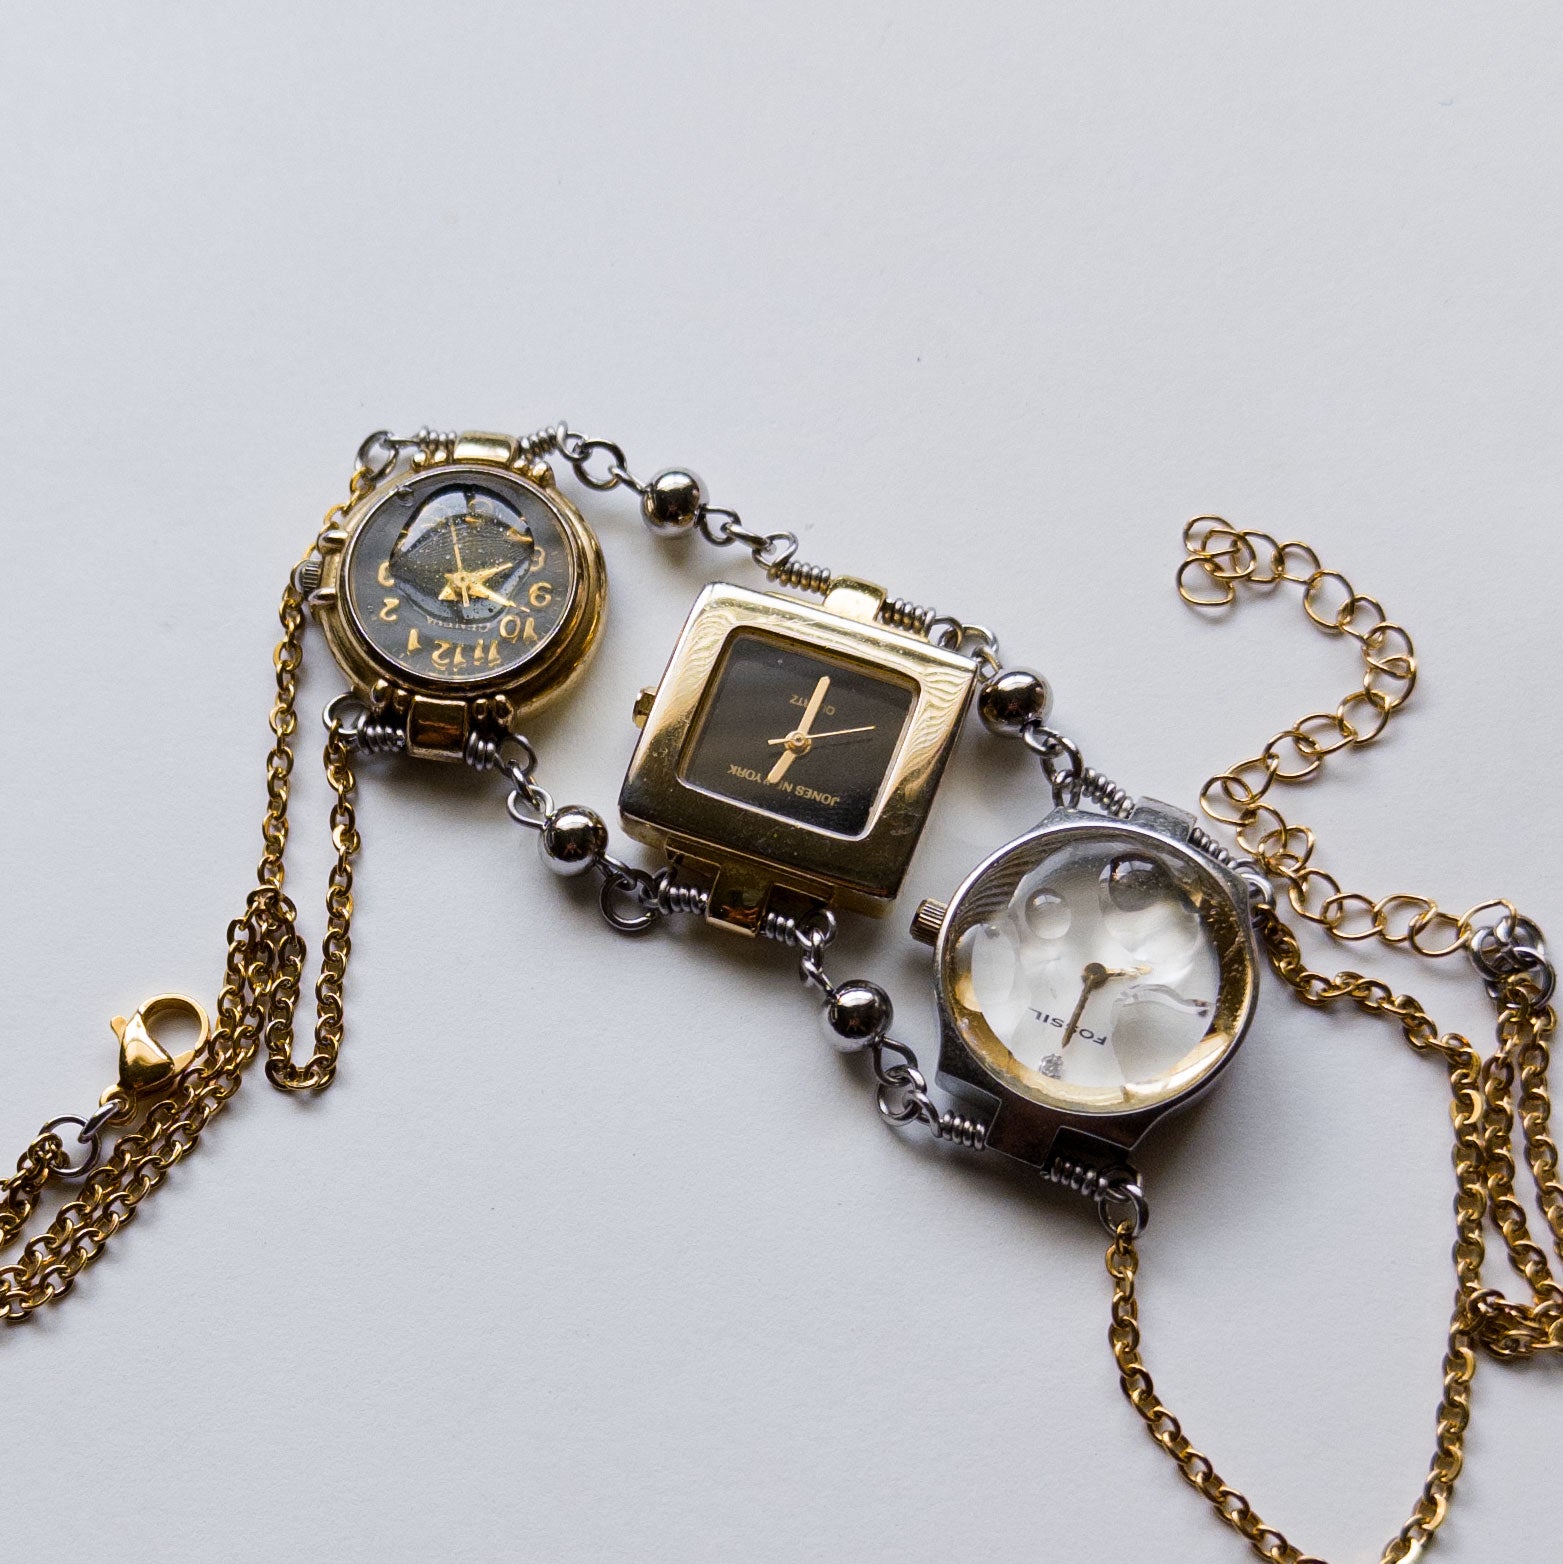 upcycled 3 vintage watch necklace choker stainless steel silver time piece clock classy elegant punk subversive accessories diy avant garde sustainable jewelry fashion futuristic  gold